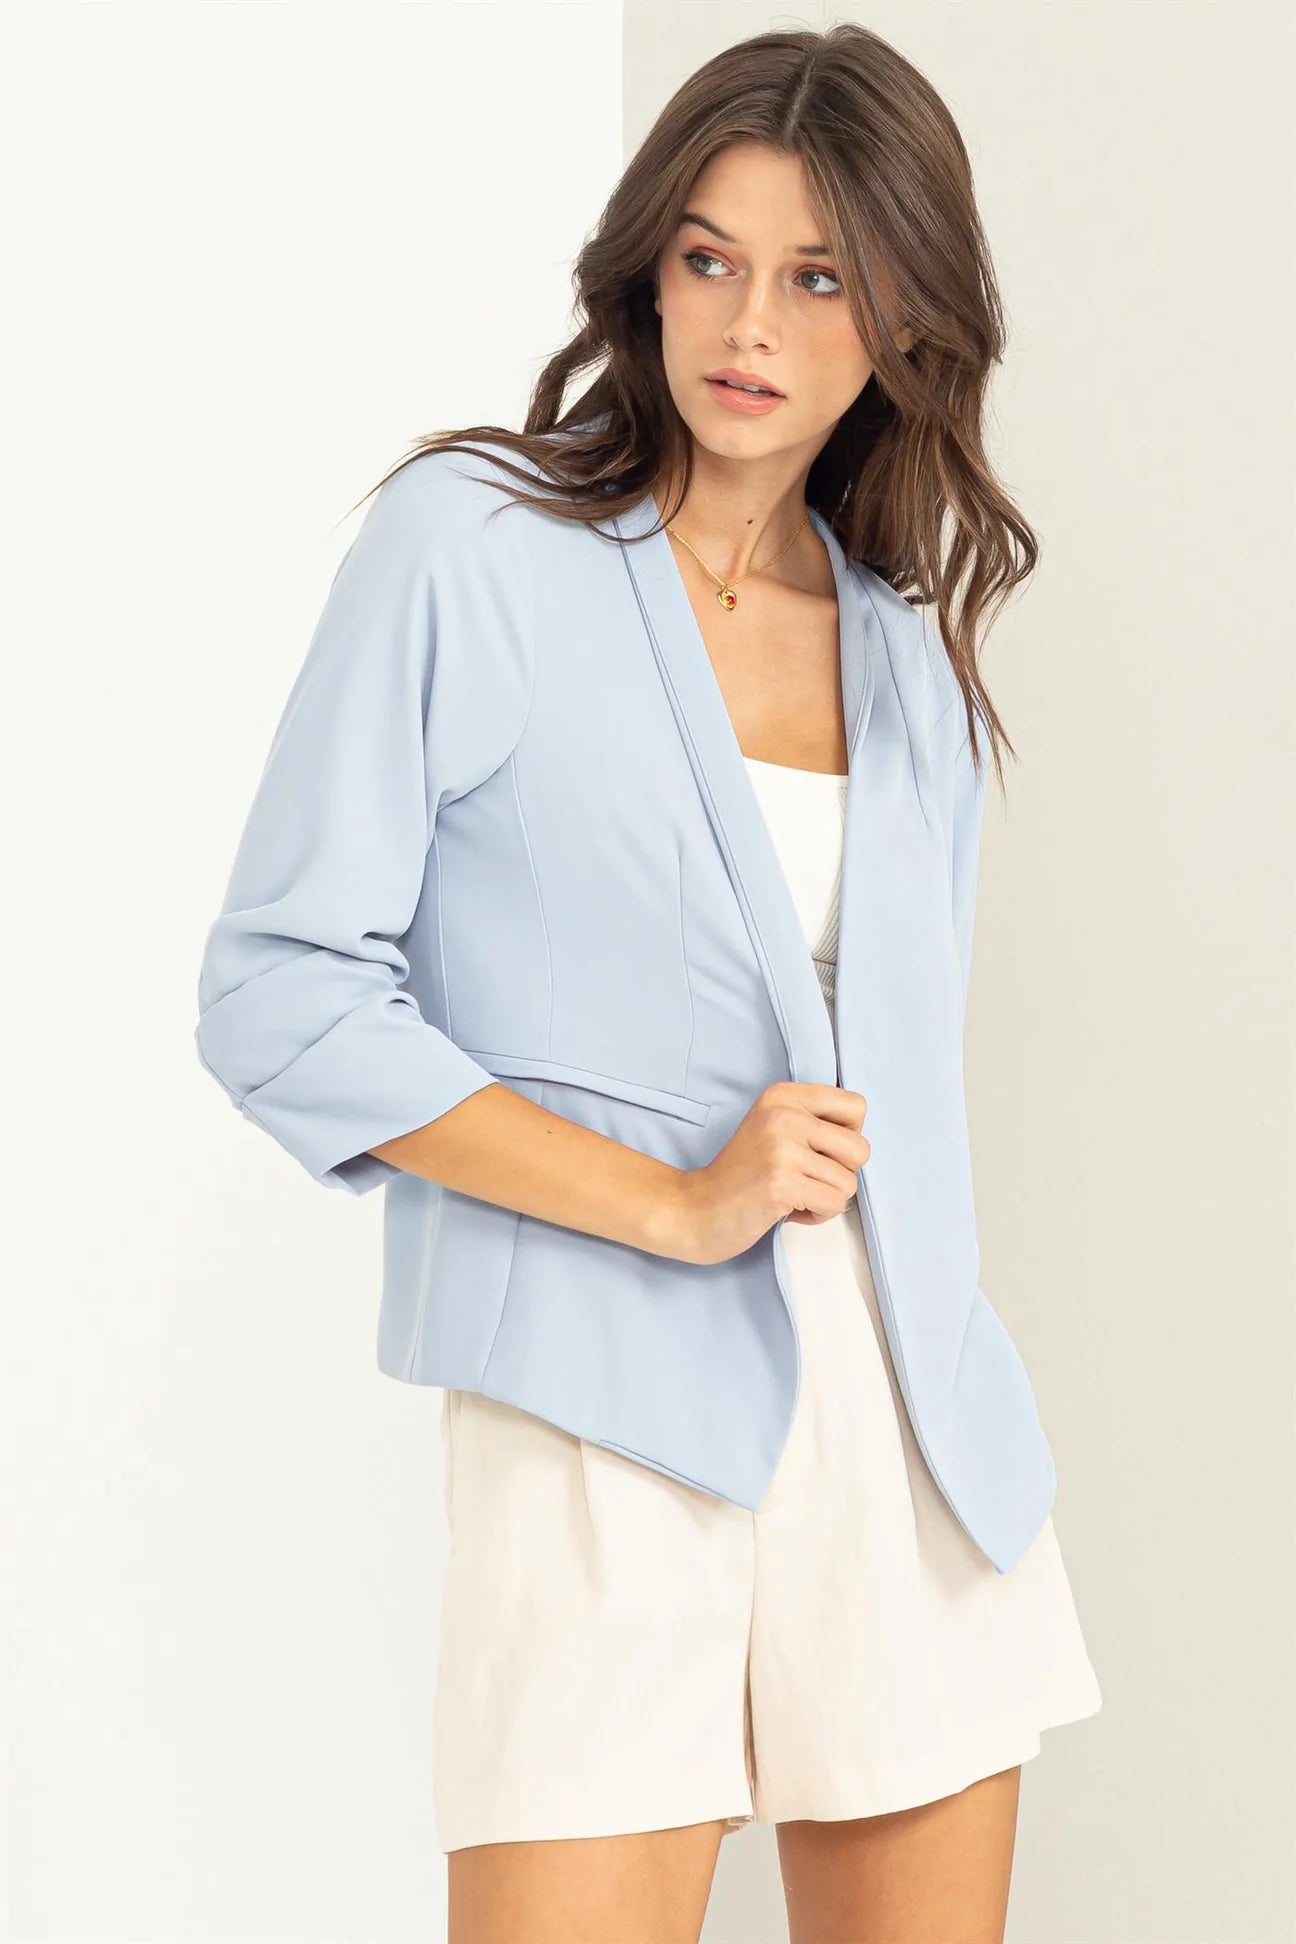 Taking Calls Ruched Sleeve Jacket